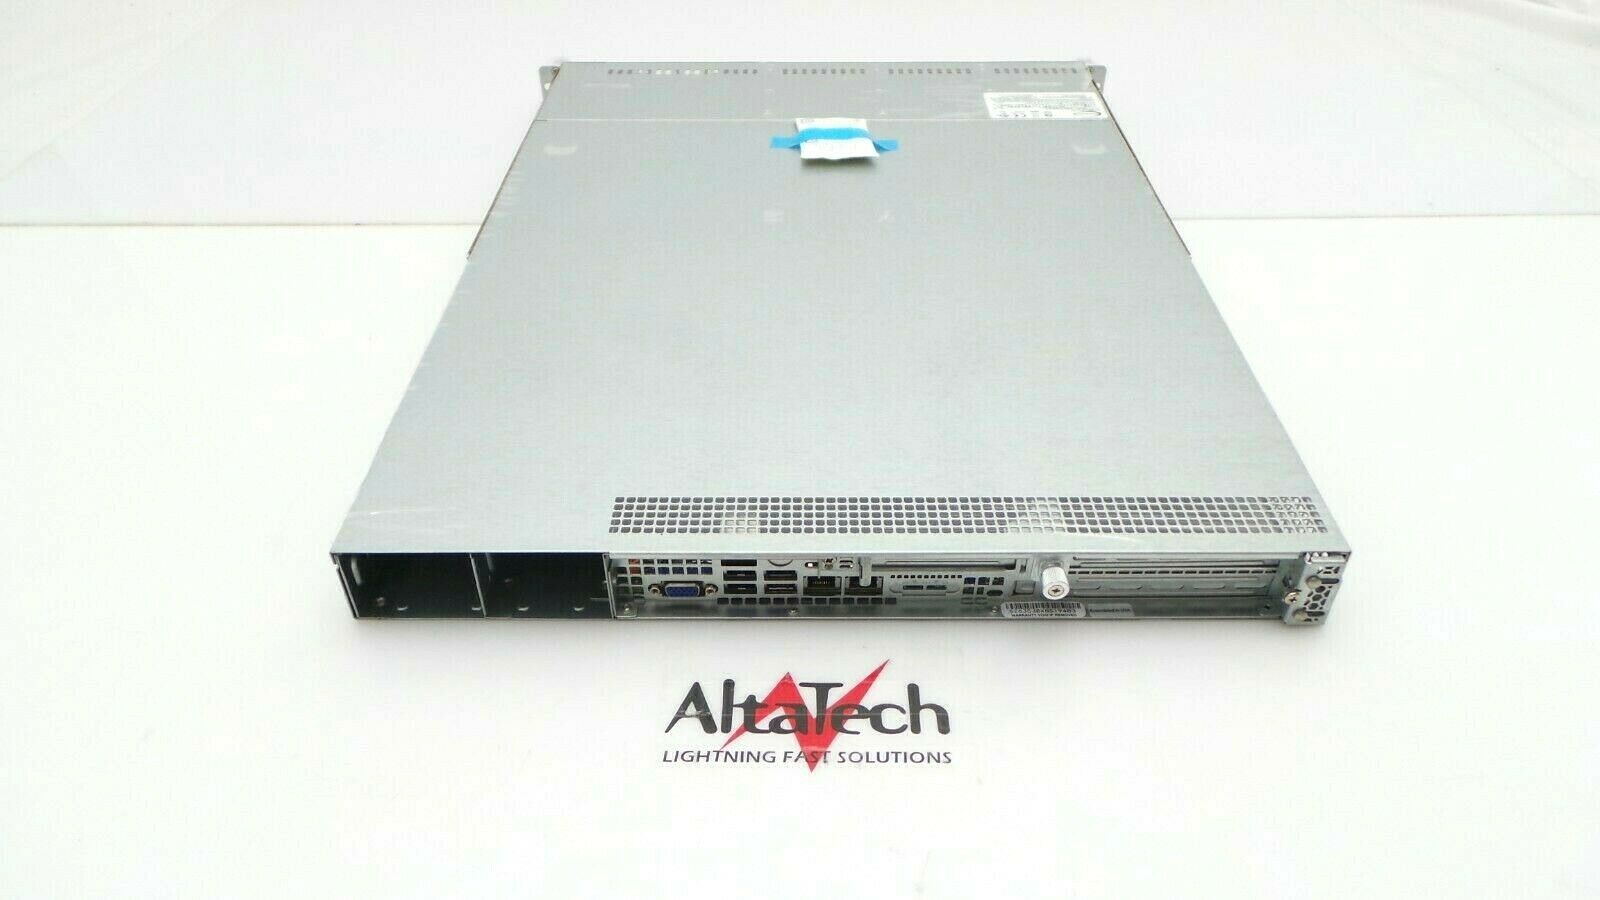 SuperMicro SYS-1029P-WTR_CTO_NOB 1U 8x SFF 2.5-Inch Bay CTO SuperServer SYS-1029P-WTR, New Open Box